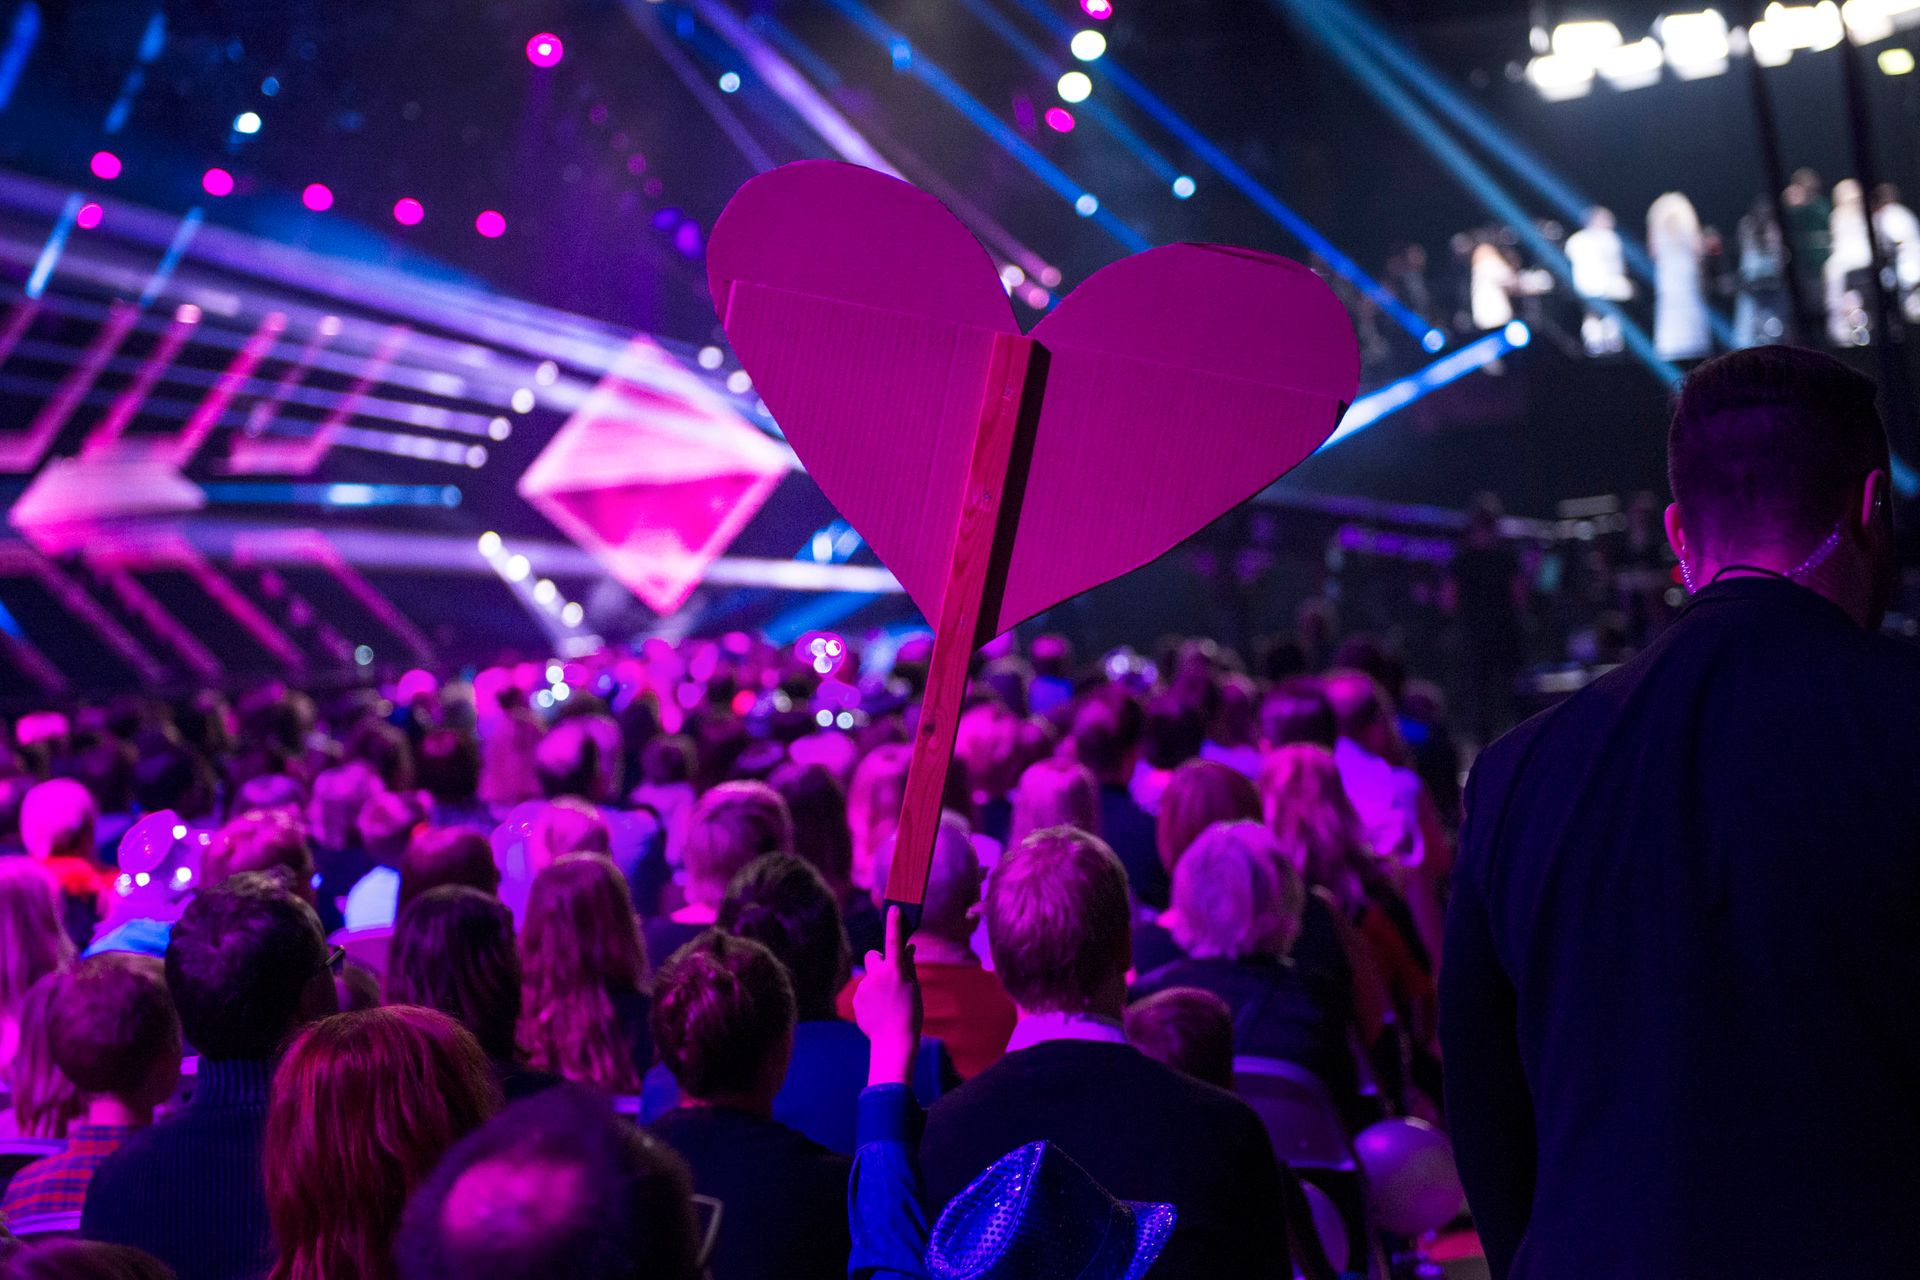 Melodifestivalen (The Melody Festival) is an annual music competition that determines the country’s representative for the Eurovision Song Contest.